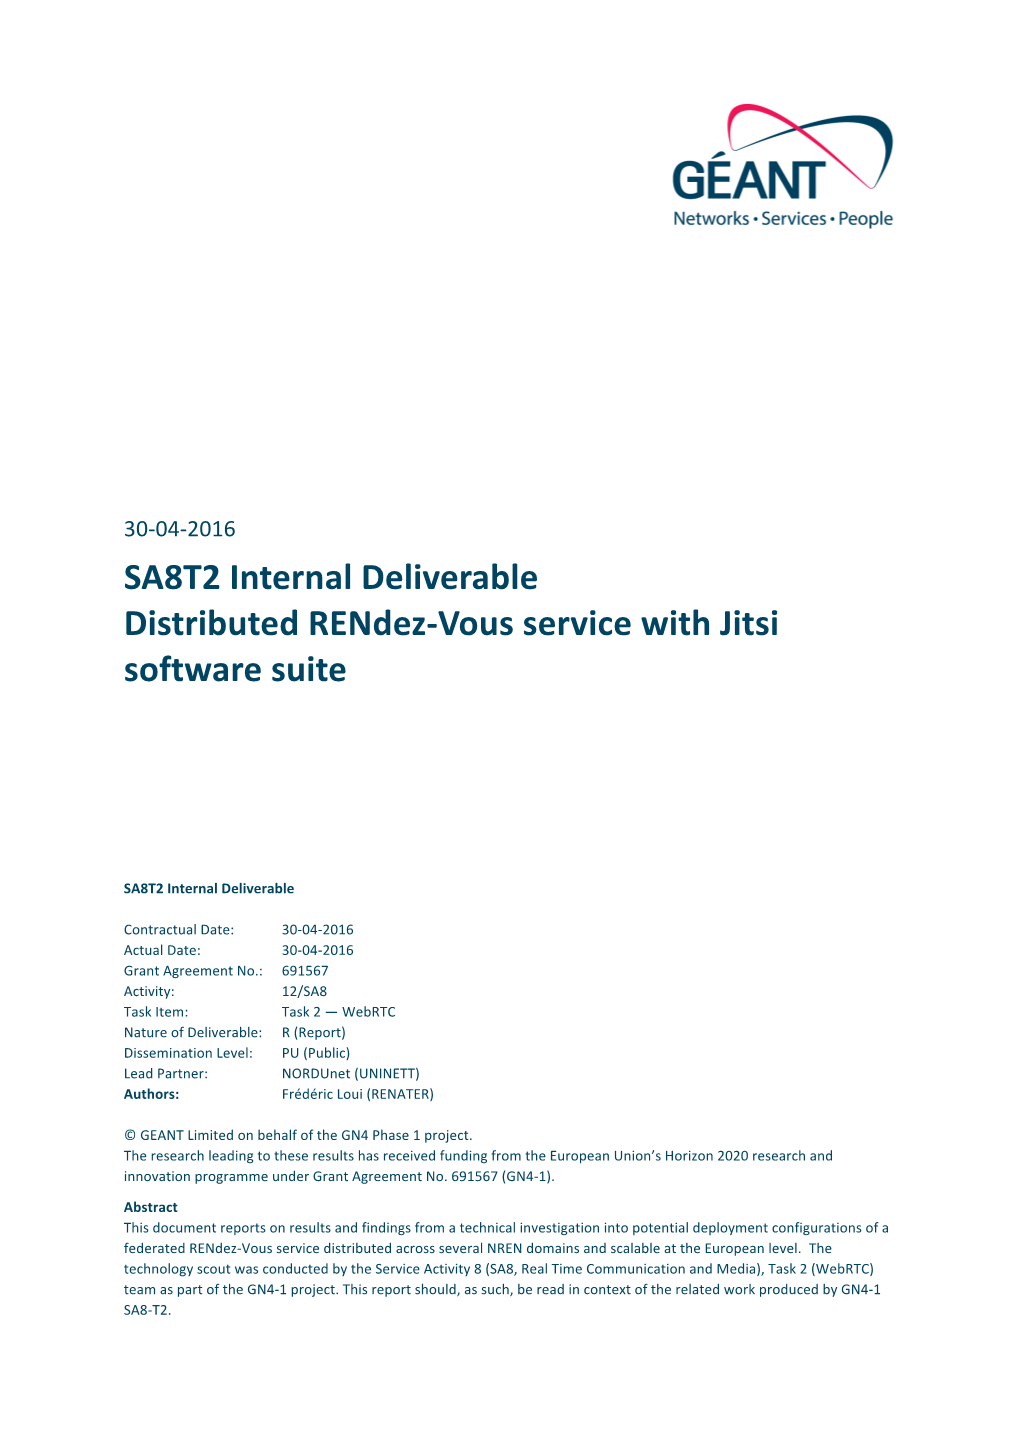 SA8T2 Internal Deliverable Distributed Rendez-Vous Service with Jitsi Software Suite